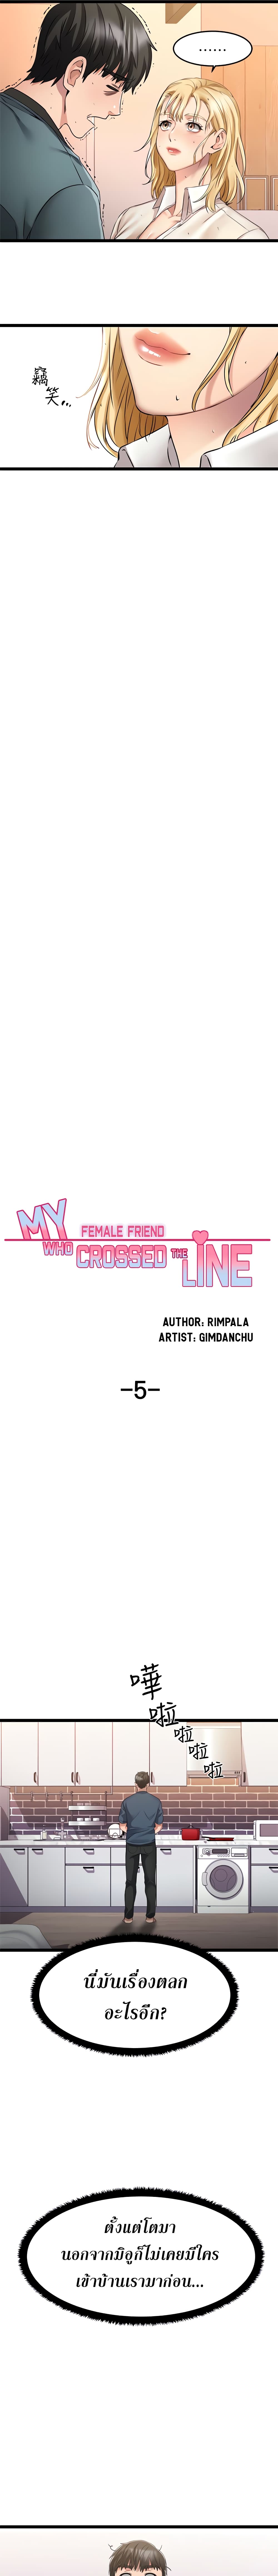 Crossing the Line 5 03